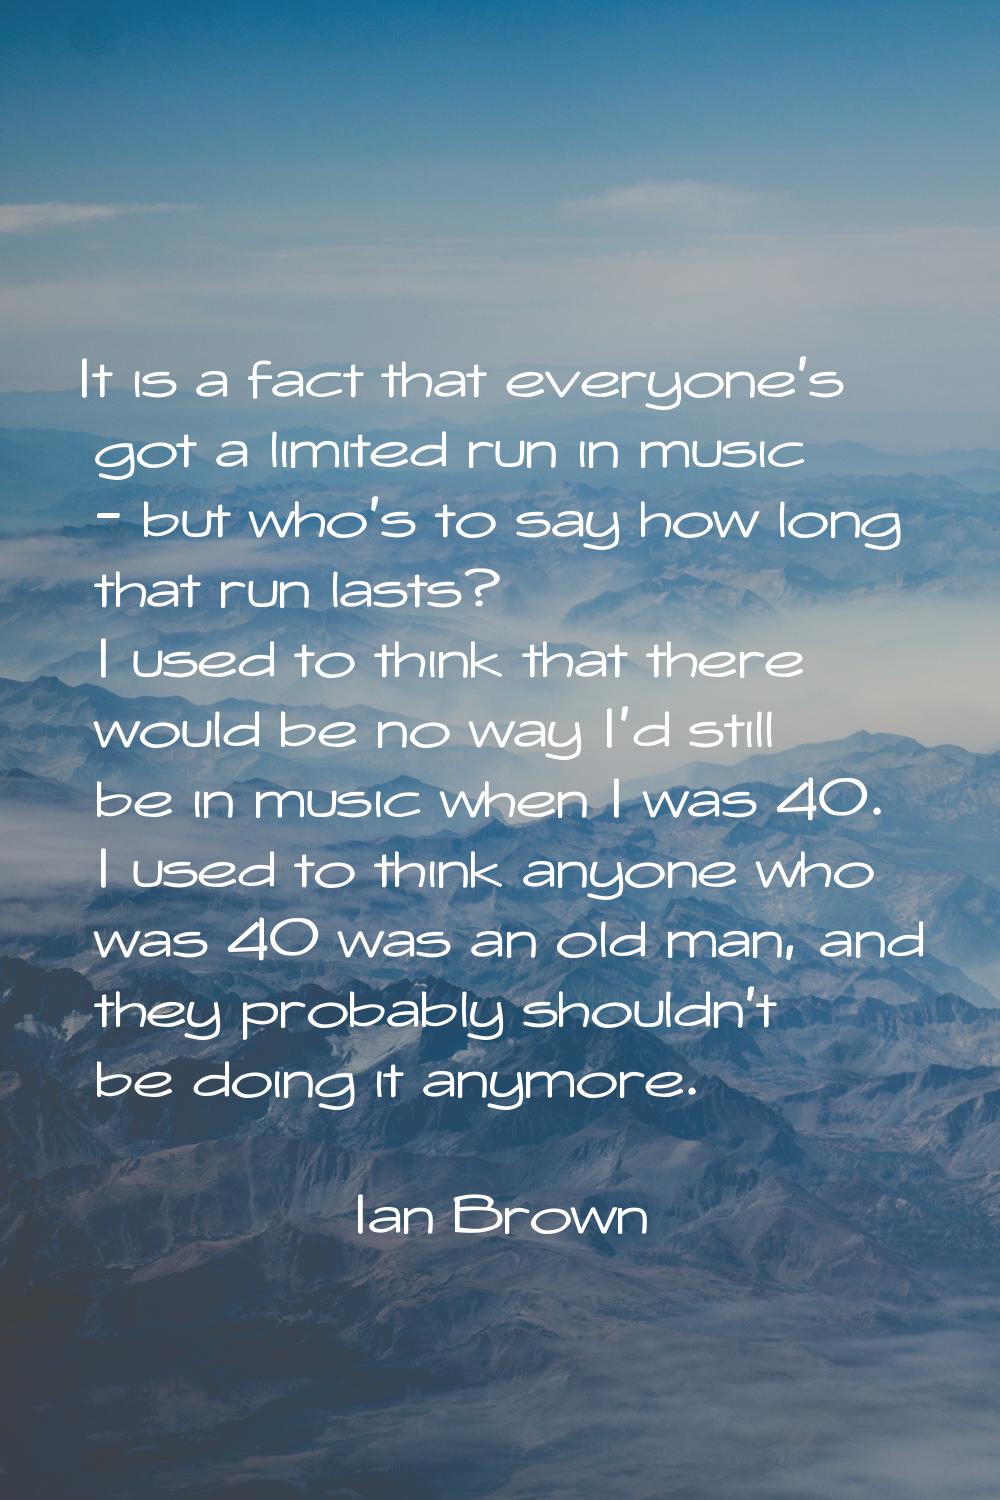 It is a fact that everyone's got a limited run in music - but who's to say how long that run lasts?